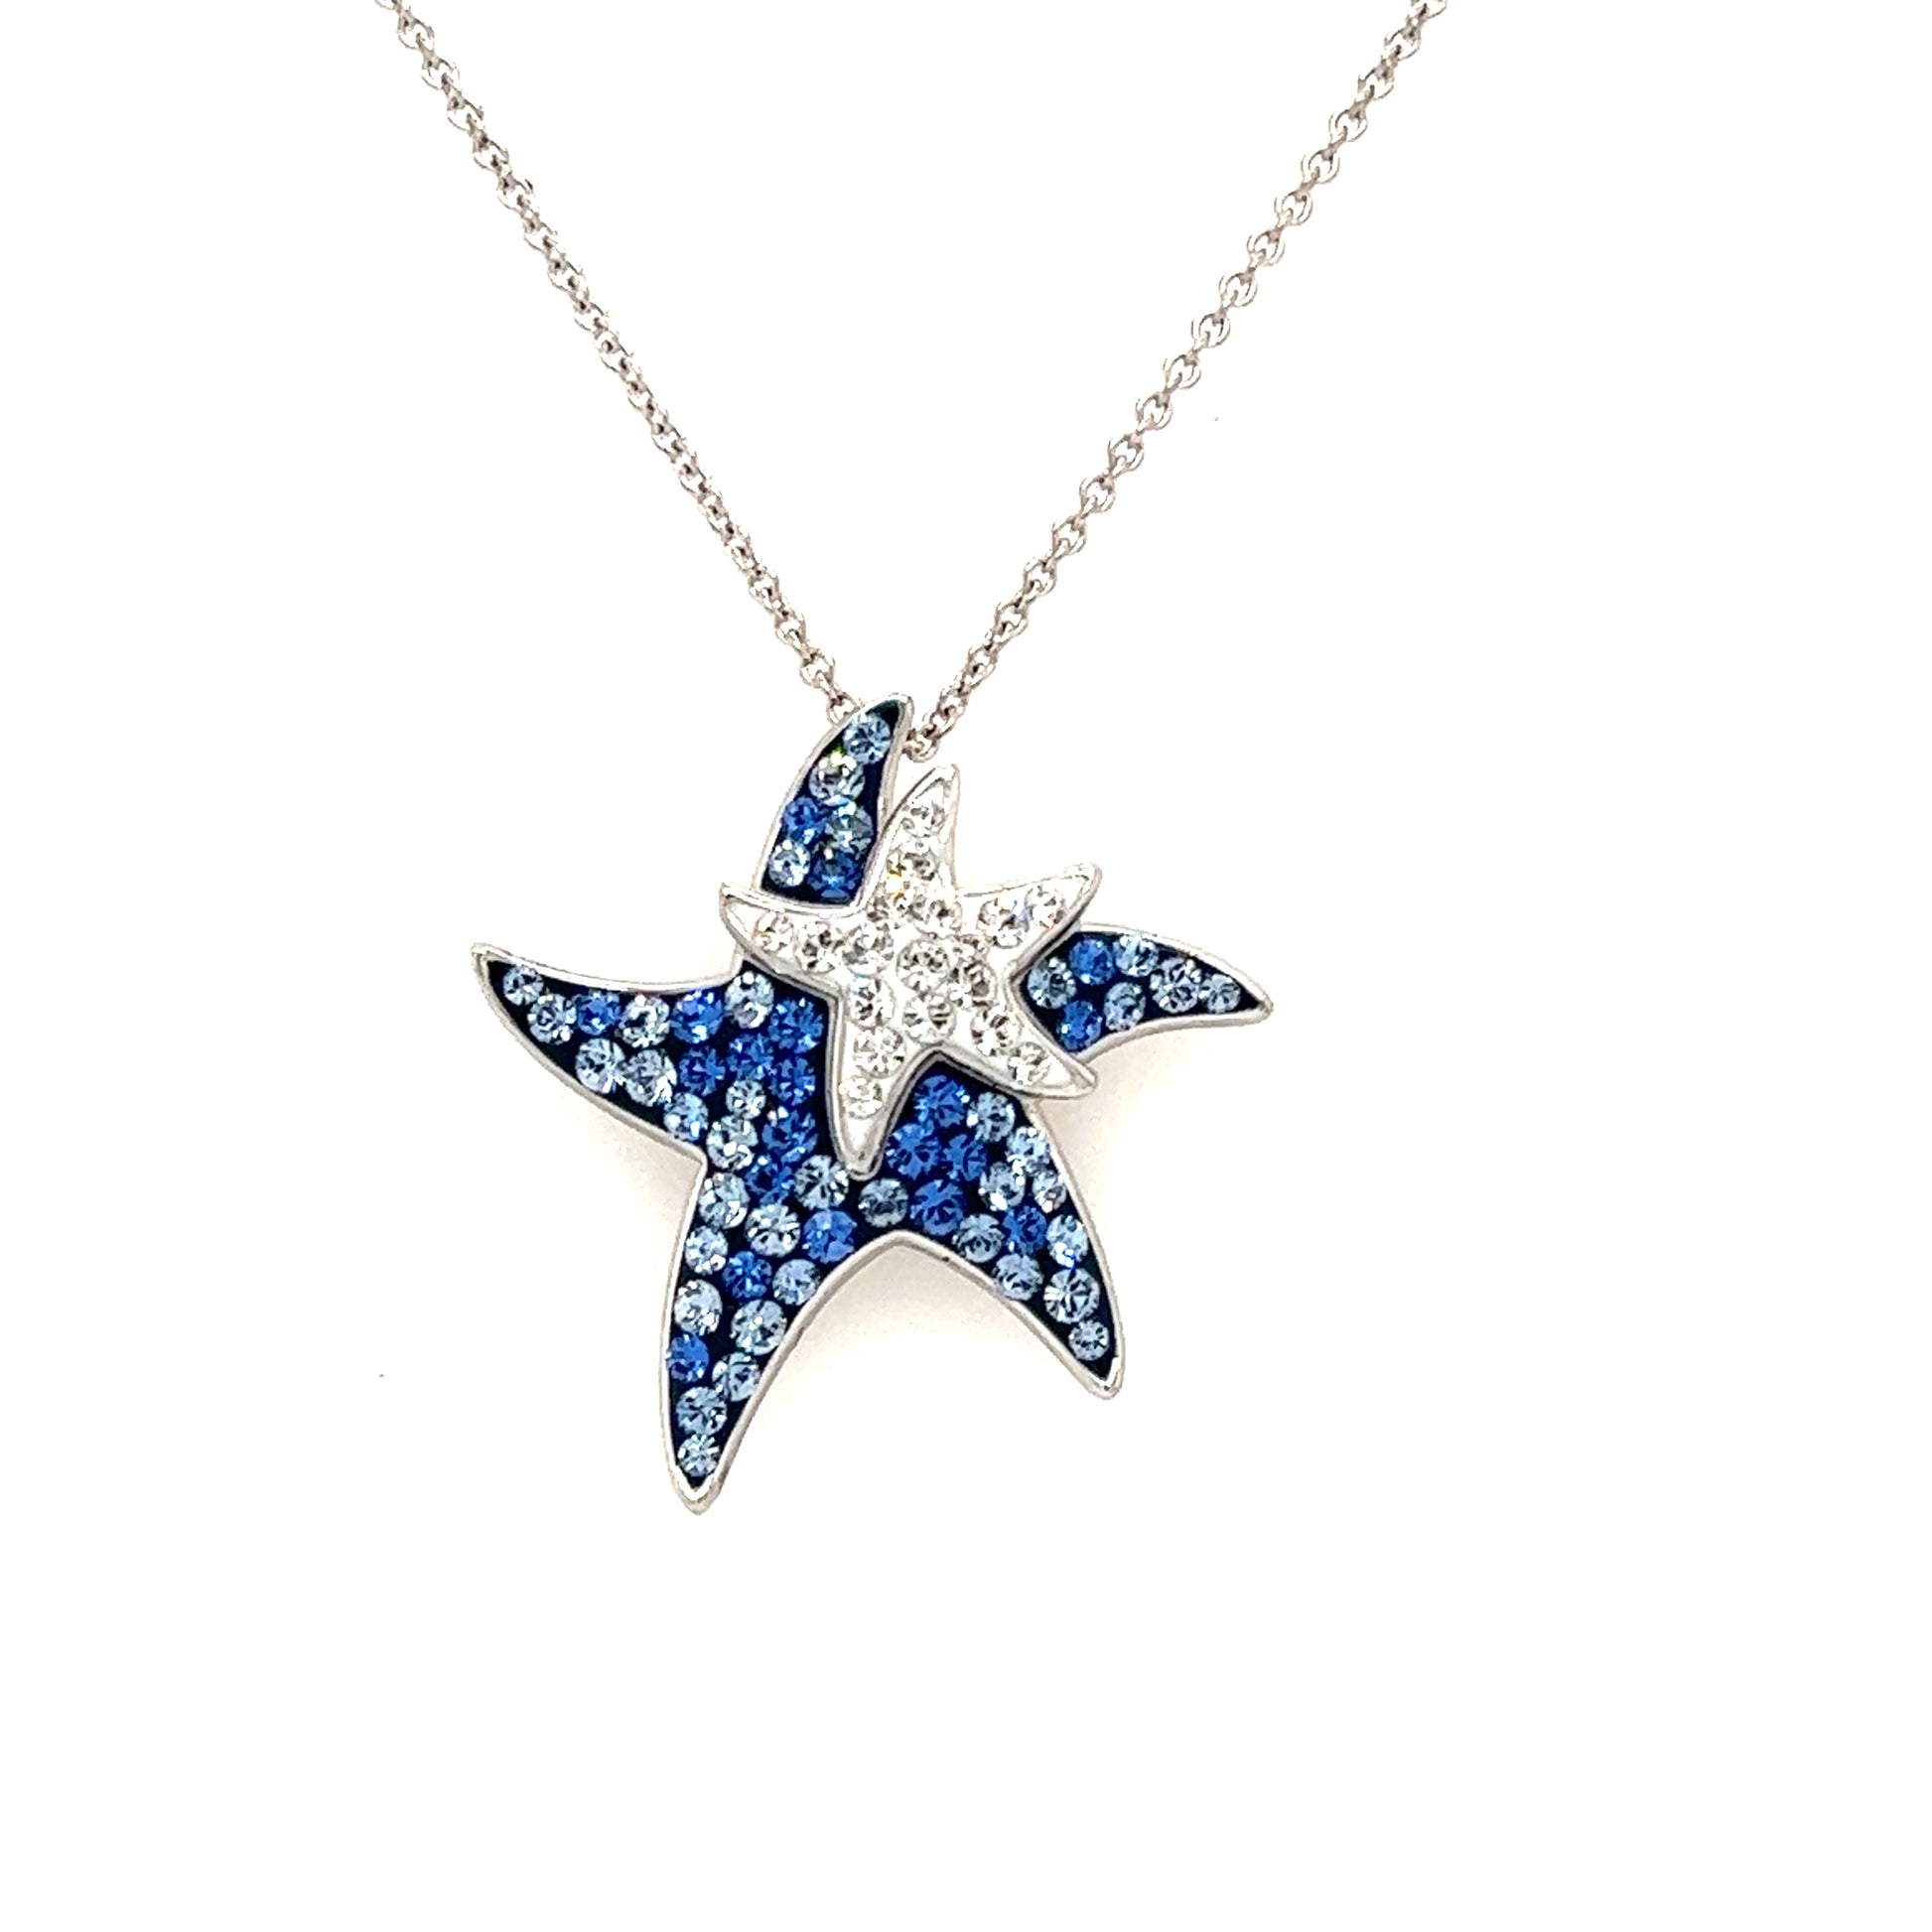 Blue Starfish Necklace with White and Blue Crystals in Sterling Silver. Front View